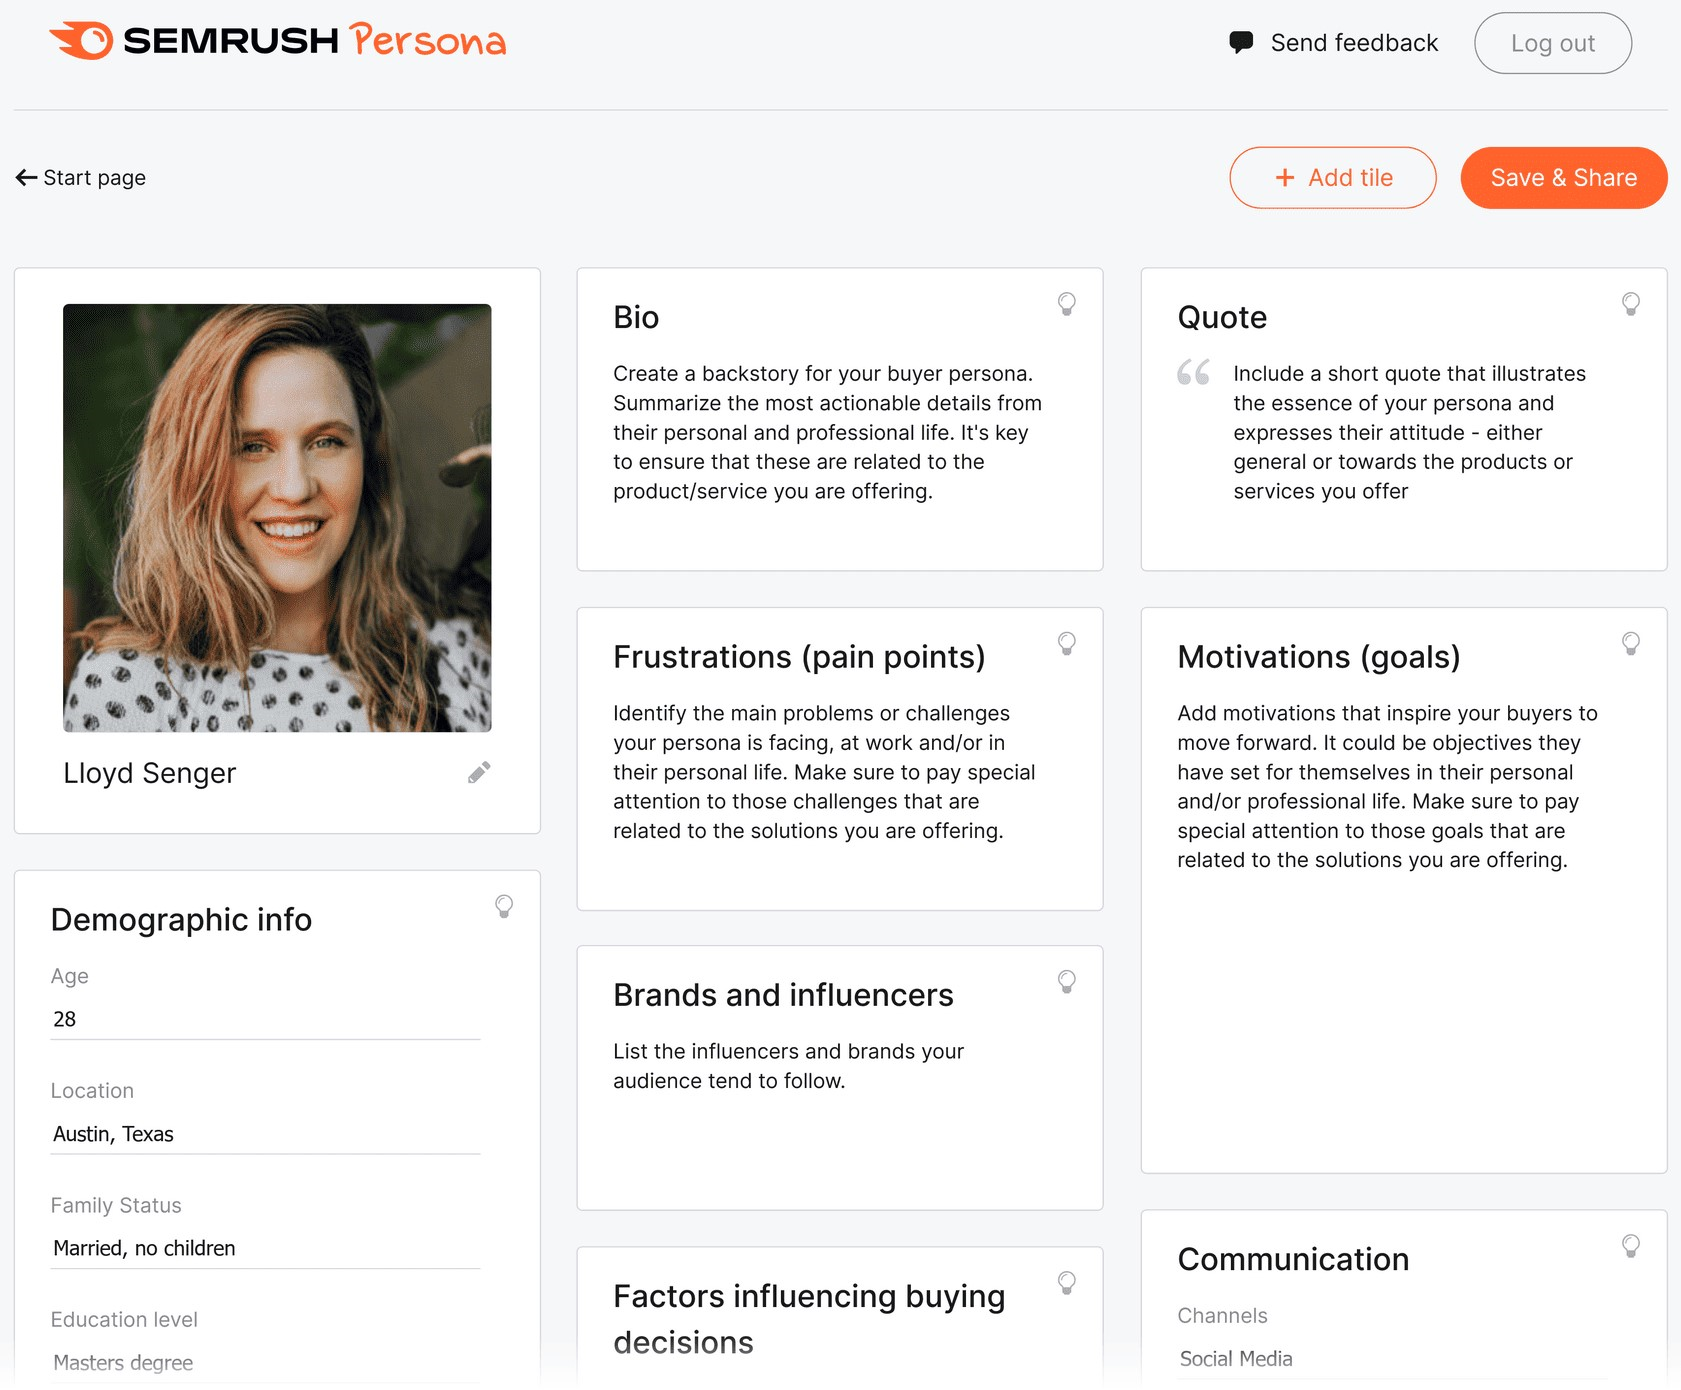 An example of a buyer persona created in Semrush Persona tool